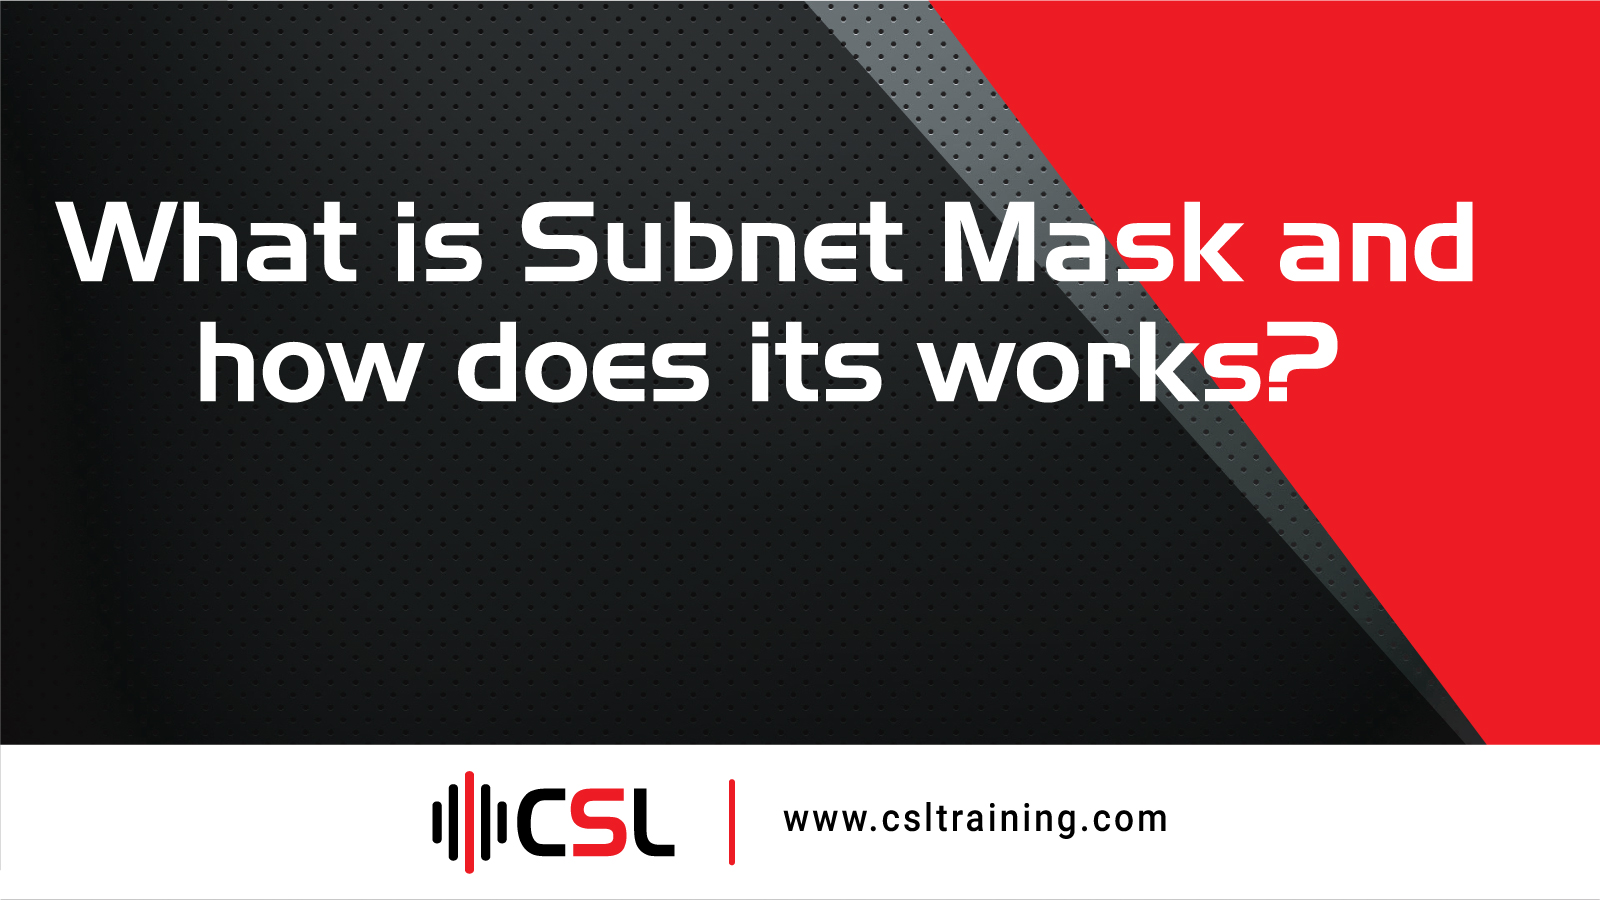 You are currently viewing What is Subnet Mask and how does its works?